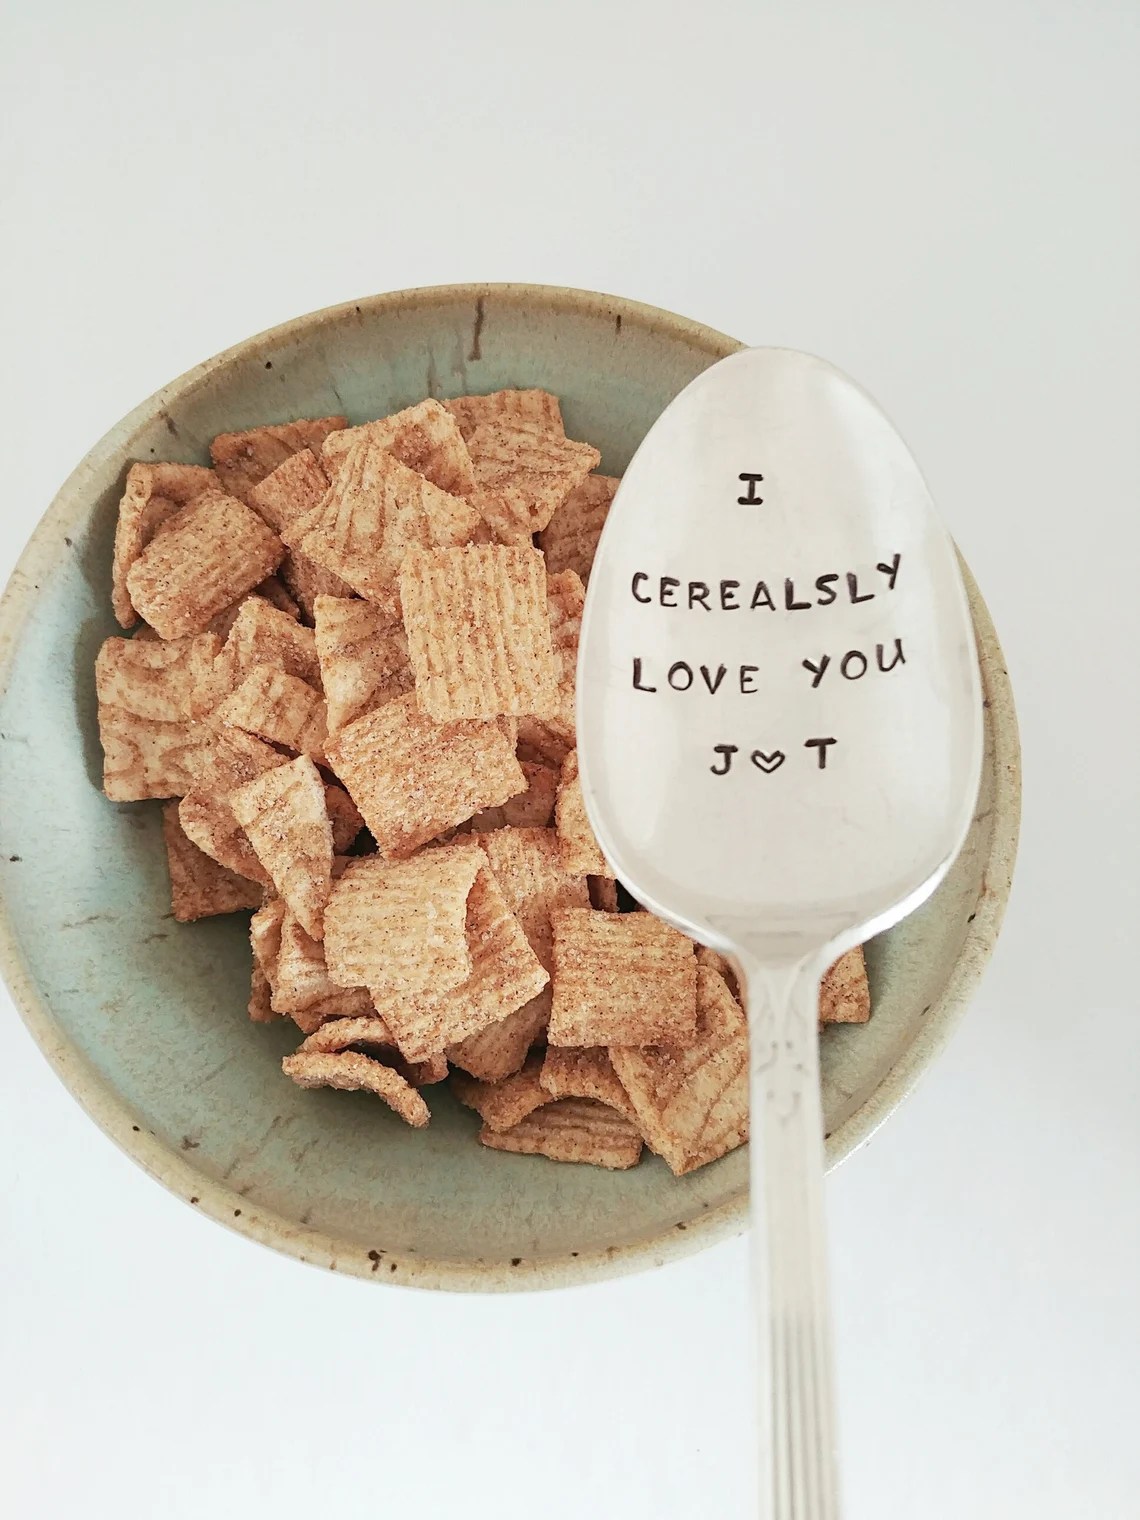 cerealsly love you spoon from etsy hovering above a cereal bowl, a cute valentine's day gift